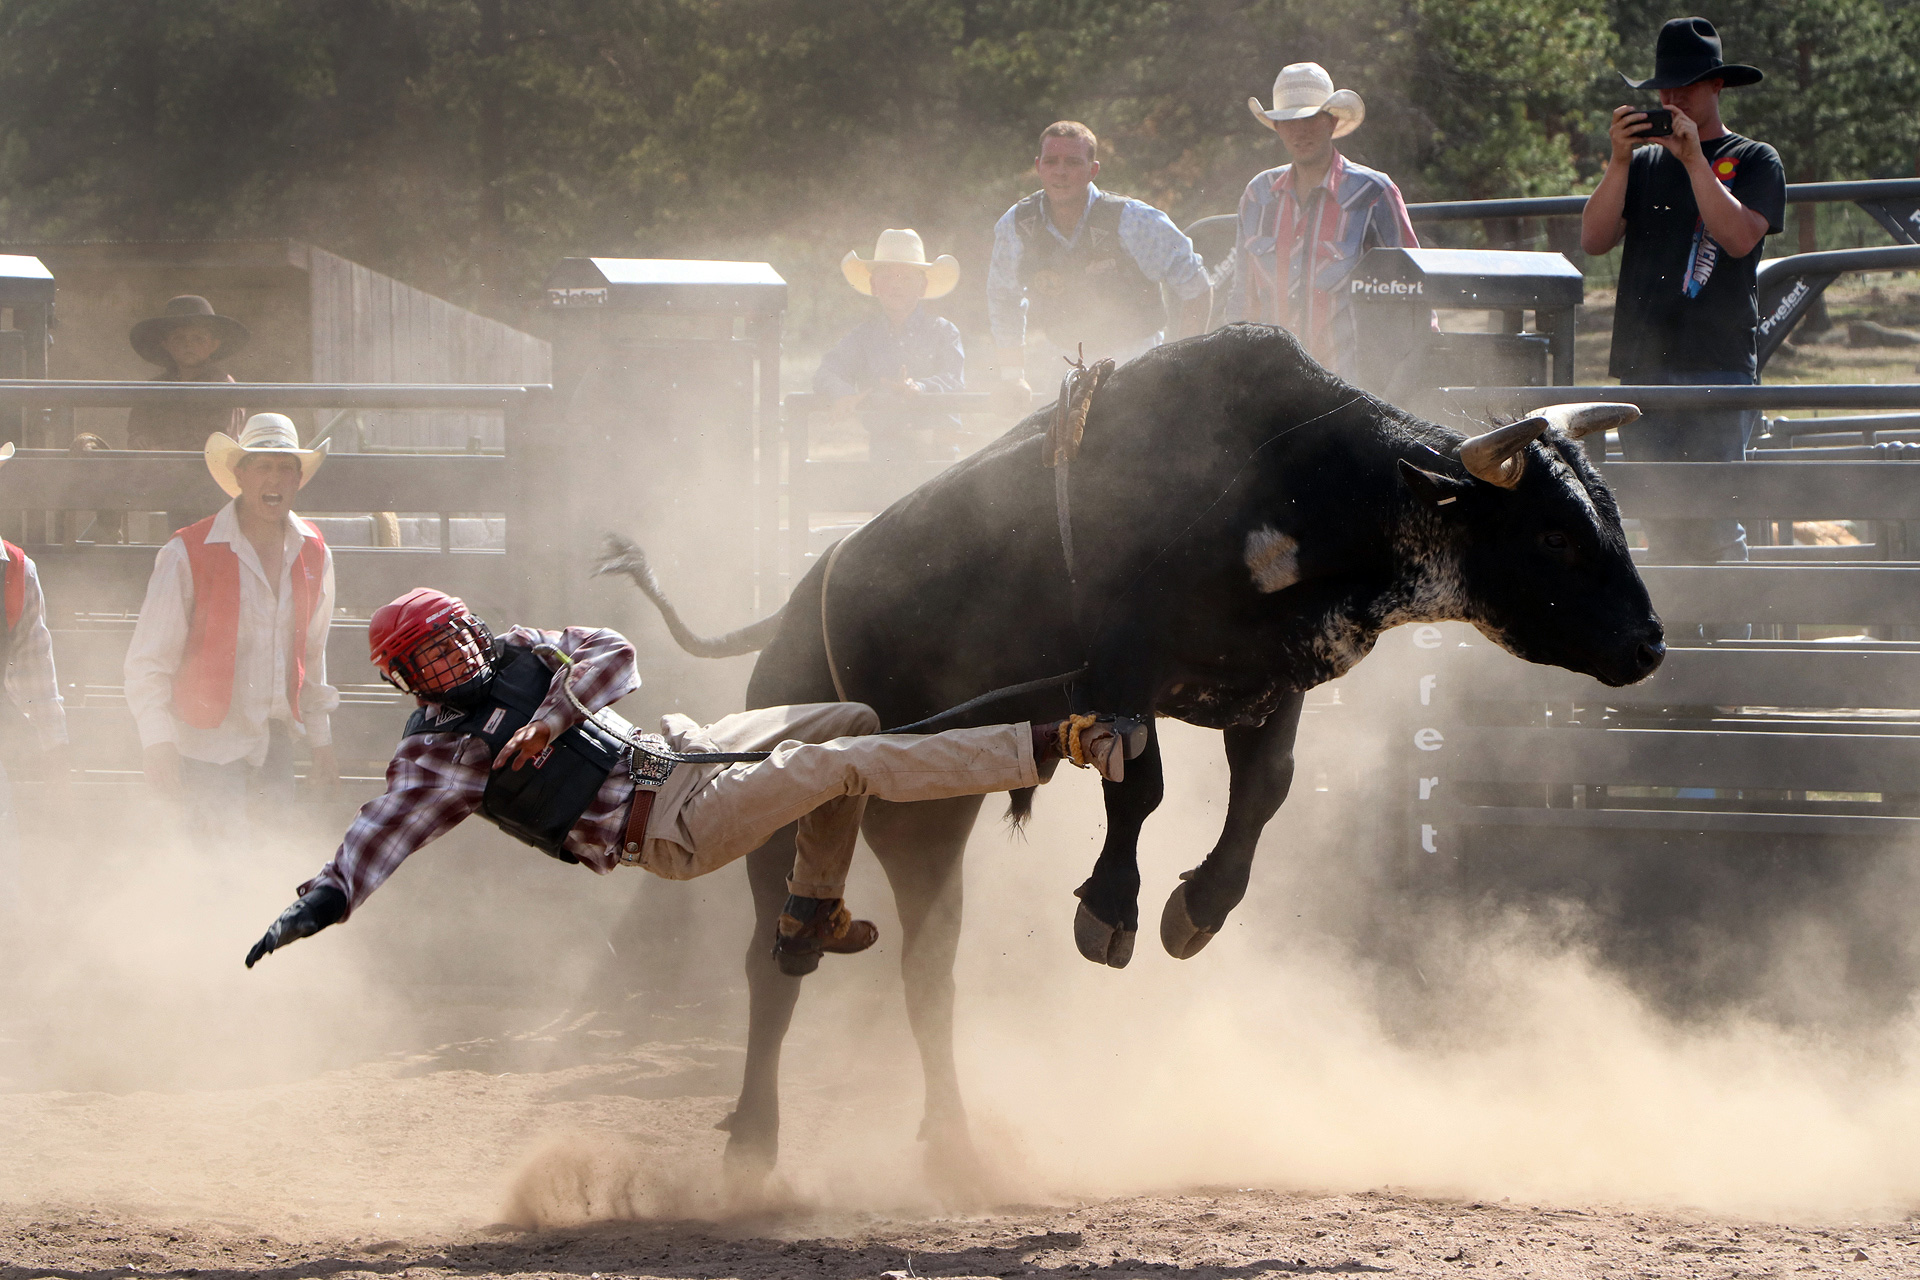 Dust flies as a bull rider gets thrown during a rodeo in Lake George, Colorado.